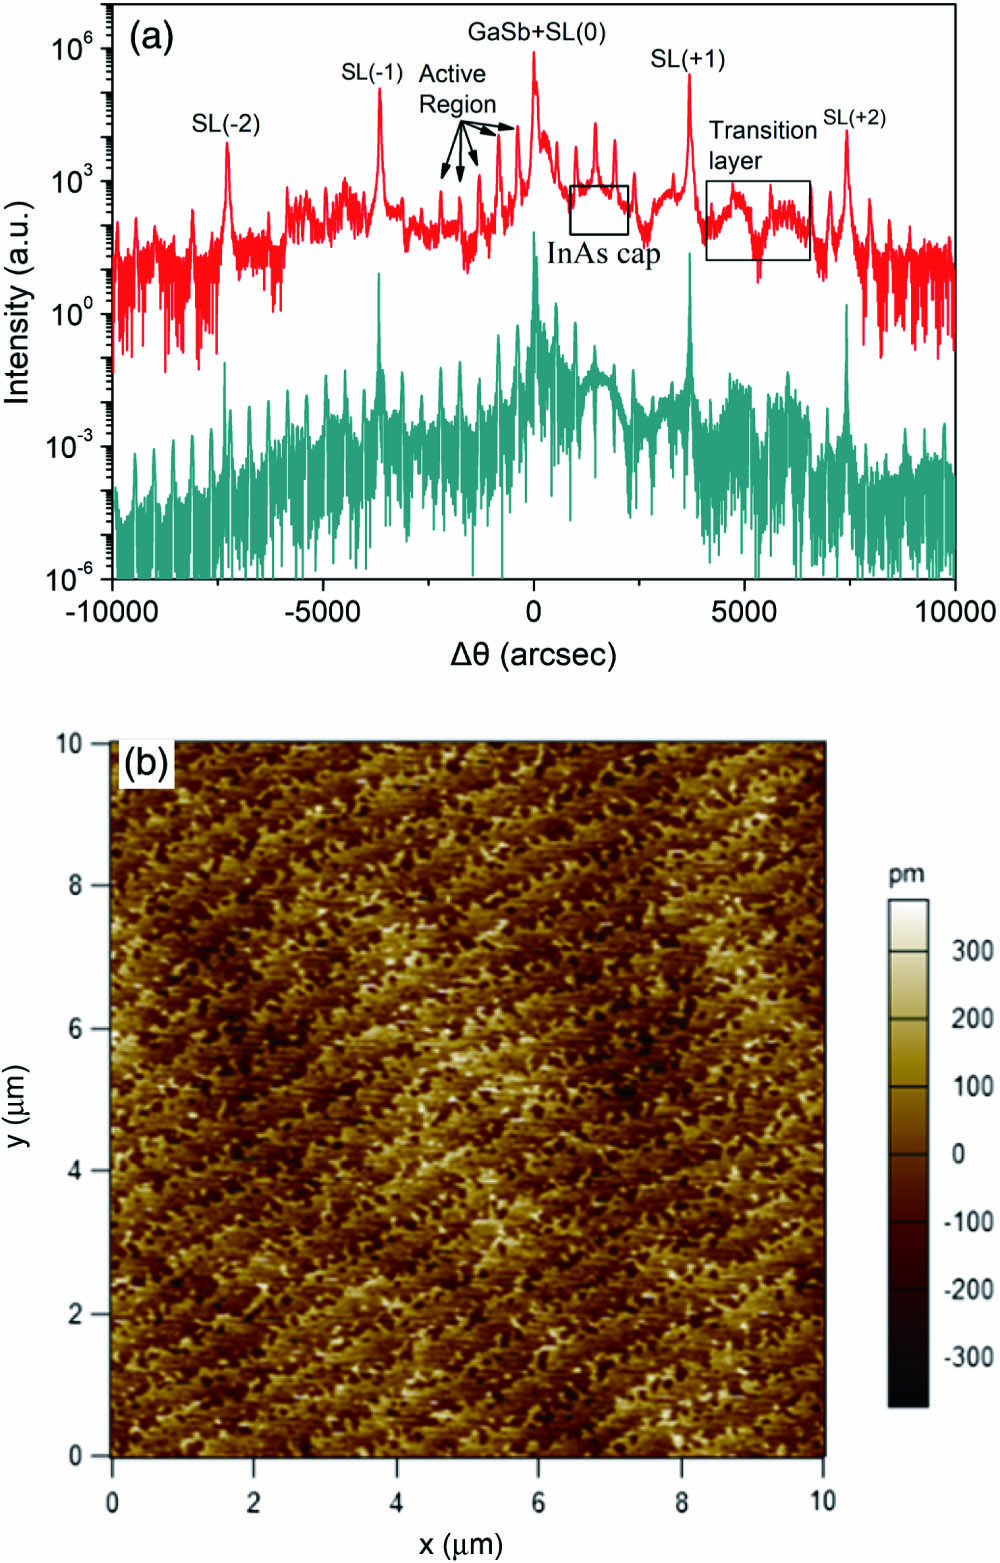 (a) High-resolution XRD pattern measured around GaSb (004) (top) of the epitaxial complete device structure and the dynamic simulation of the same structure (bottom); (b) AFM image measured on the surface of a complete device structure.